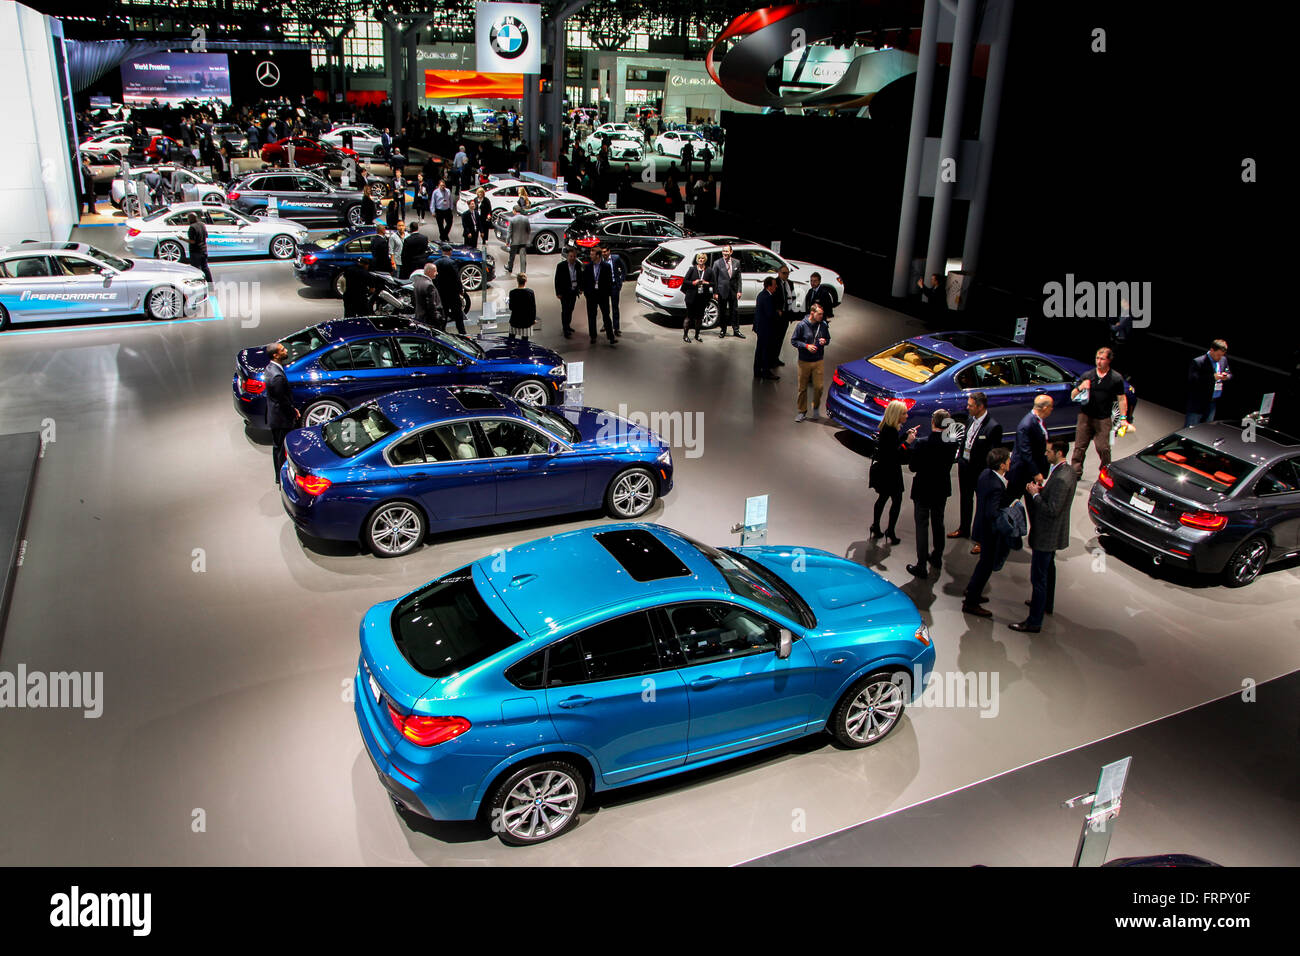 Manhattan, New York, USA. 23rd Mar, 2016. Atmosphere at the New York International Auto Show 2016, at the Jacob Javits Center. This was Press Preview Day. Stock Photo